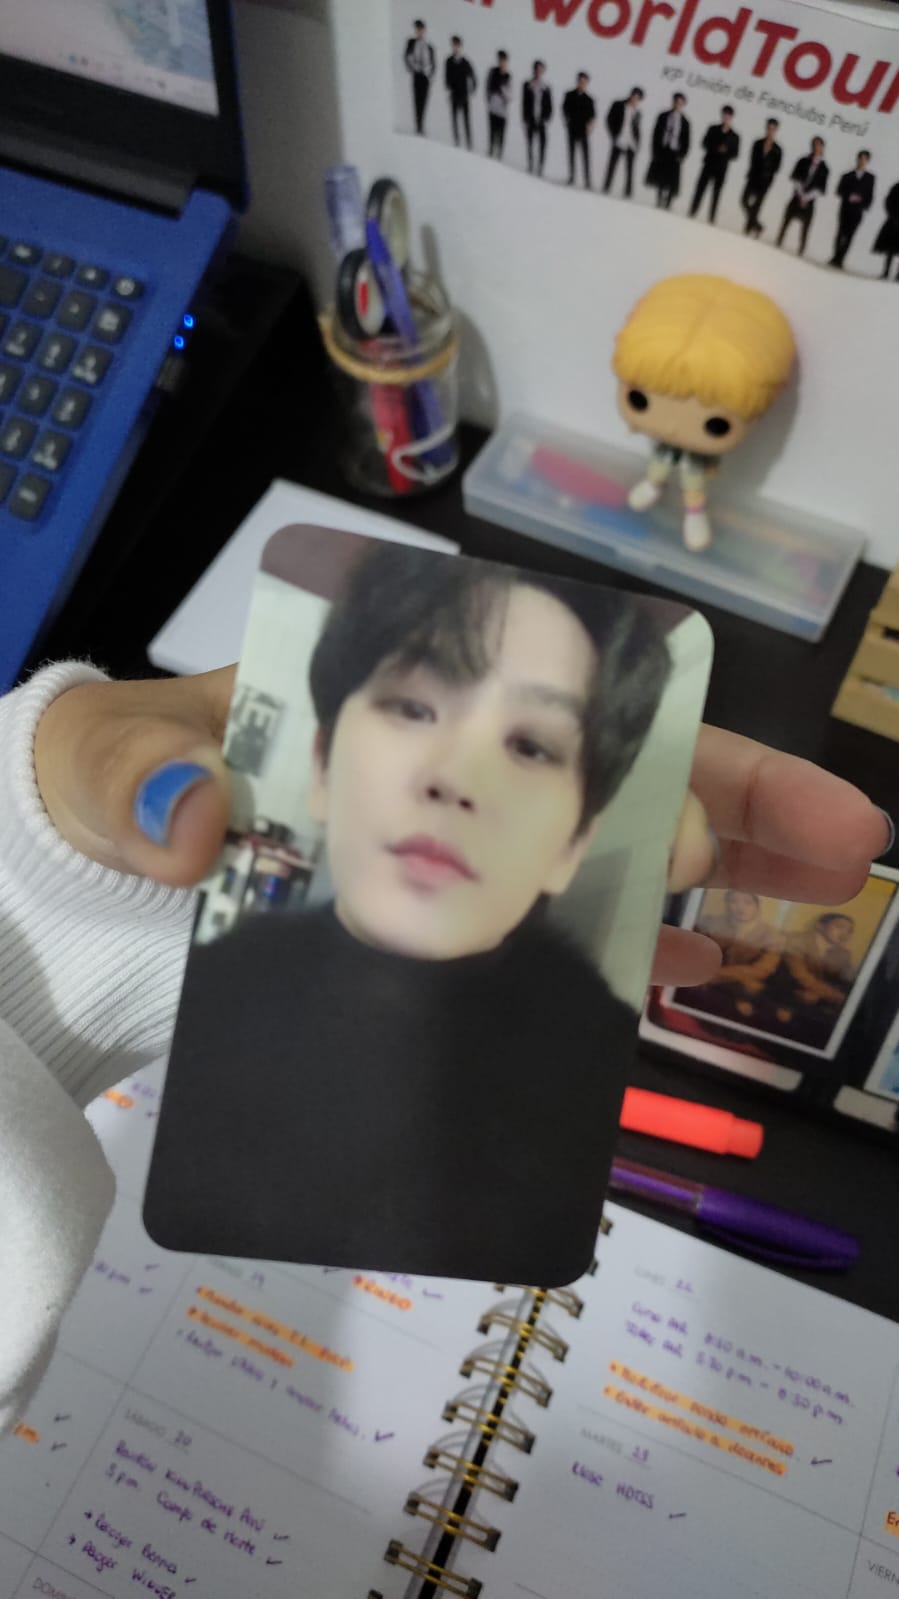 This is the size of a photo card.